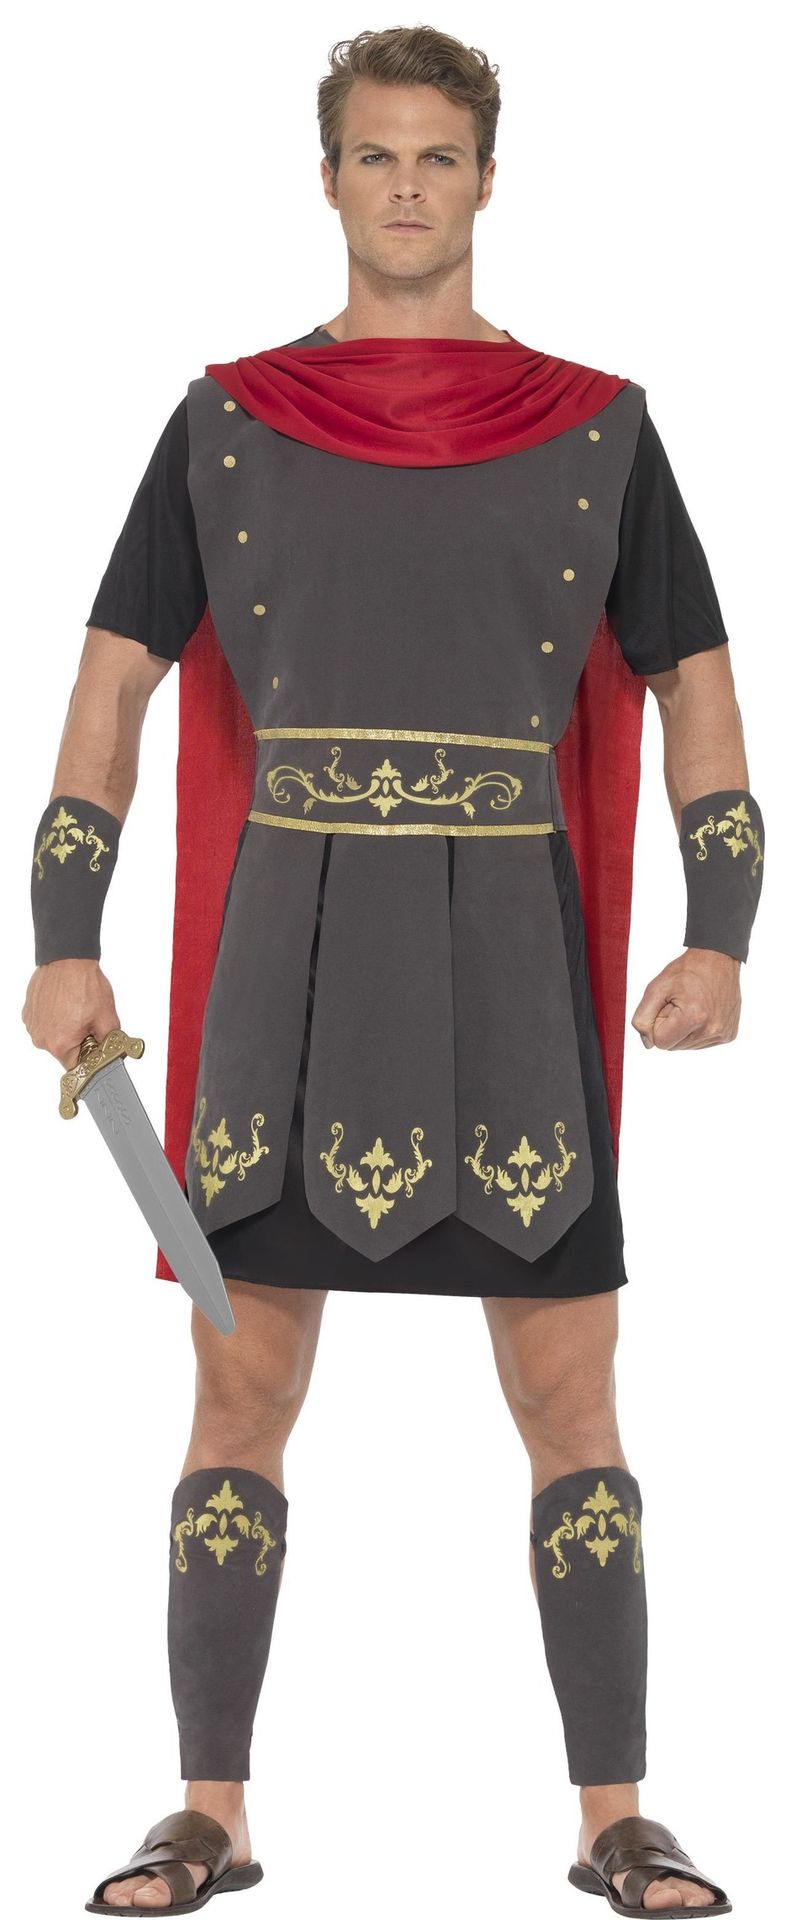 Romeinse Gladiator outfit mannen